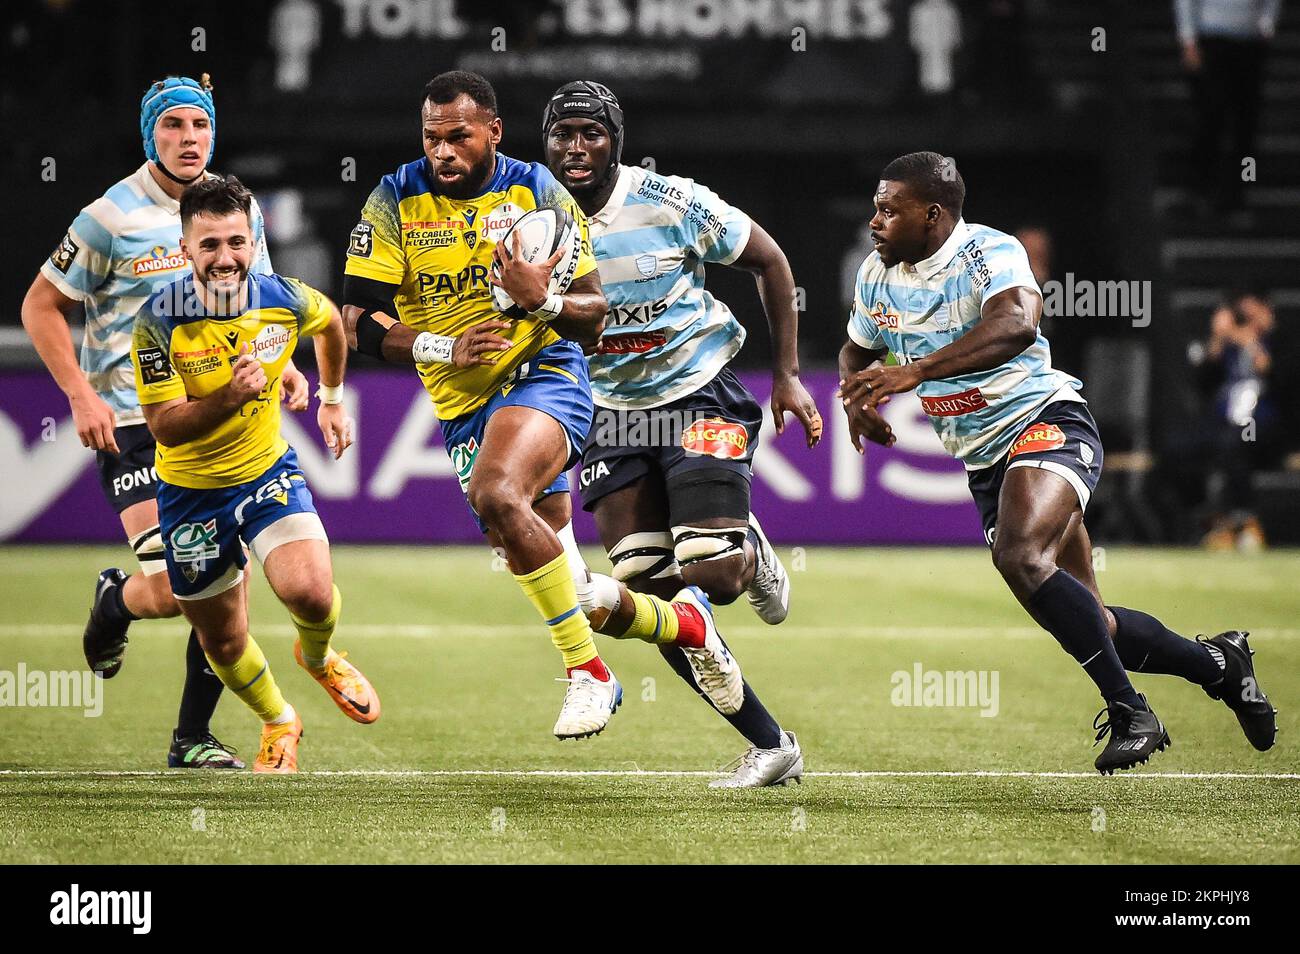 Maxime BAUDONNE of Racing 92, Kevin VIALLARD of Clermont, Ibrahim